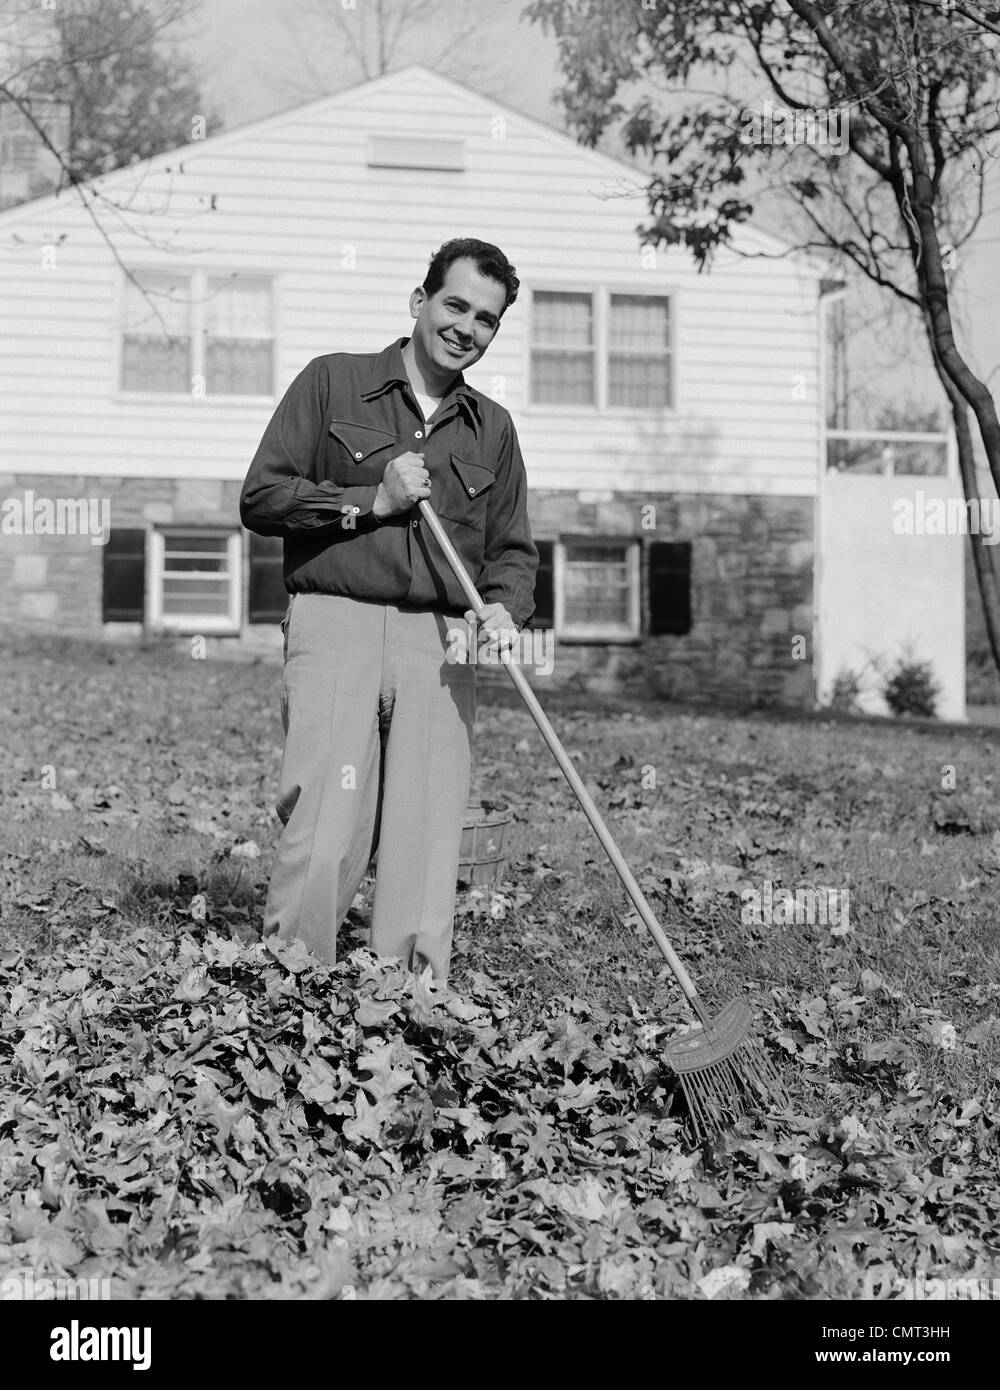 1950s 1960s SMILING MAN RAKING AUTUMN LEAVES IN FRONT YARD OF HOUSE Stock Photo